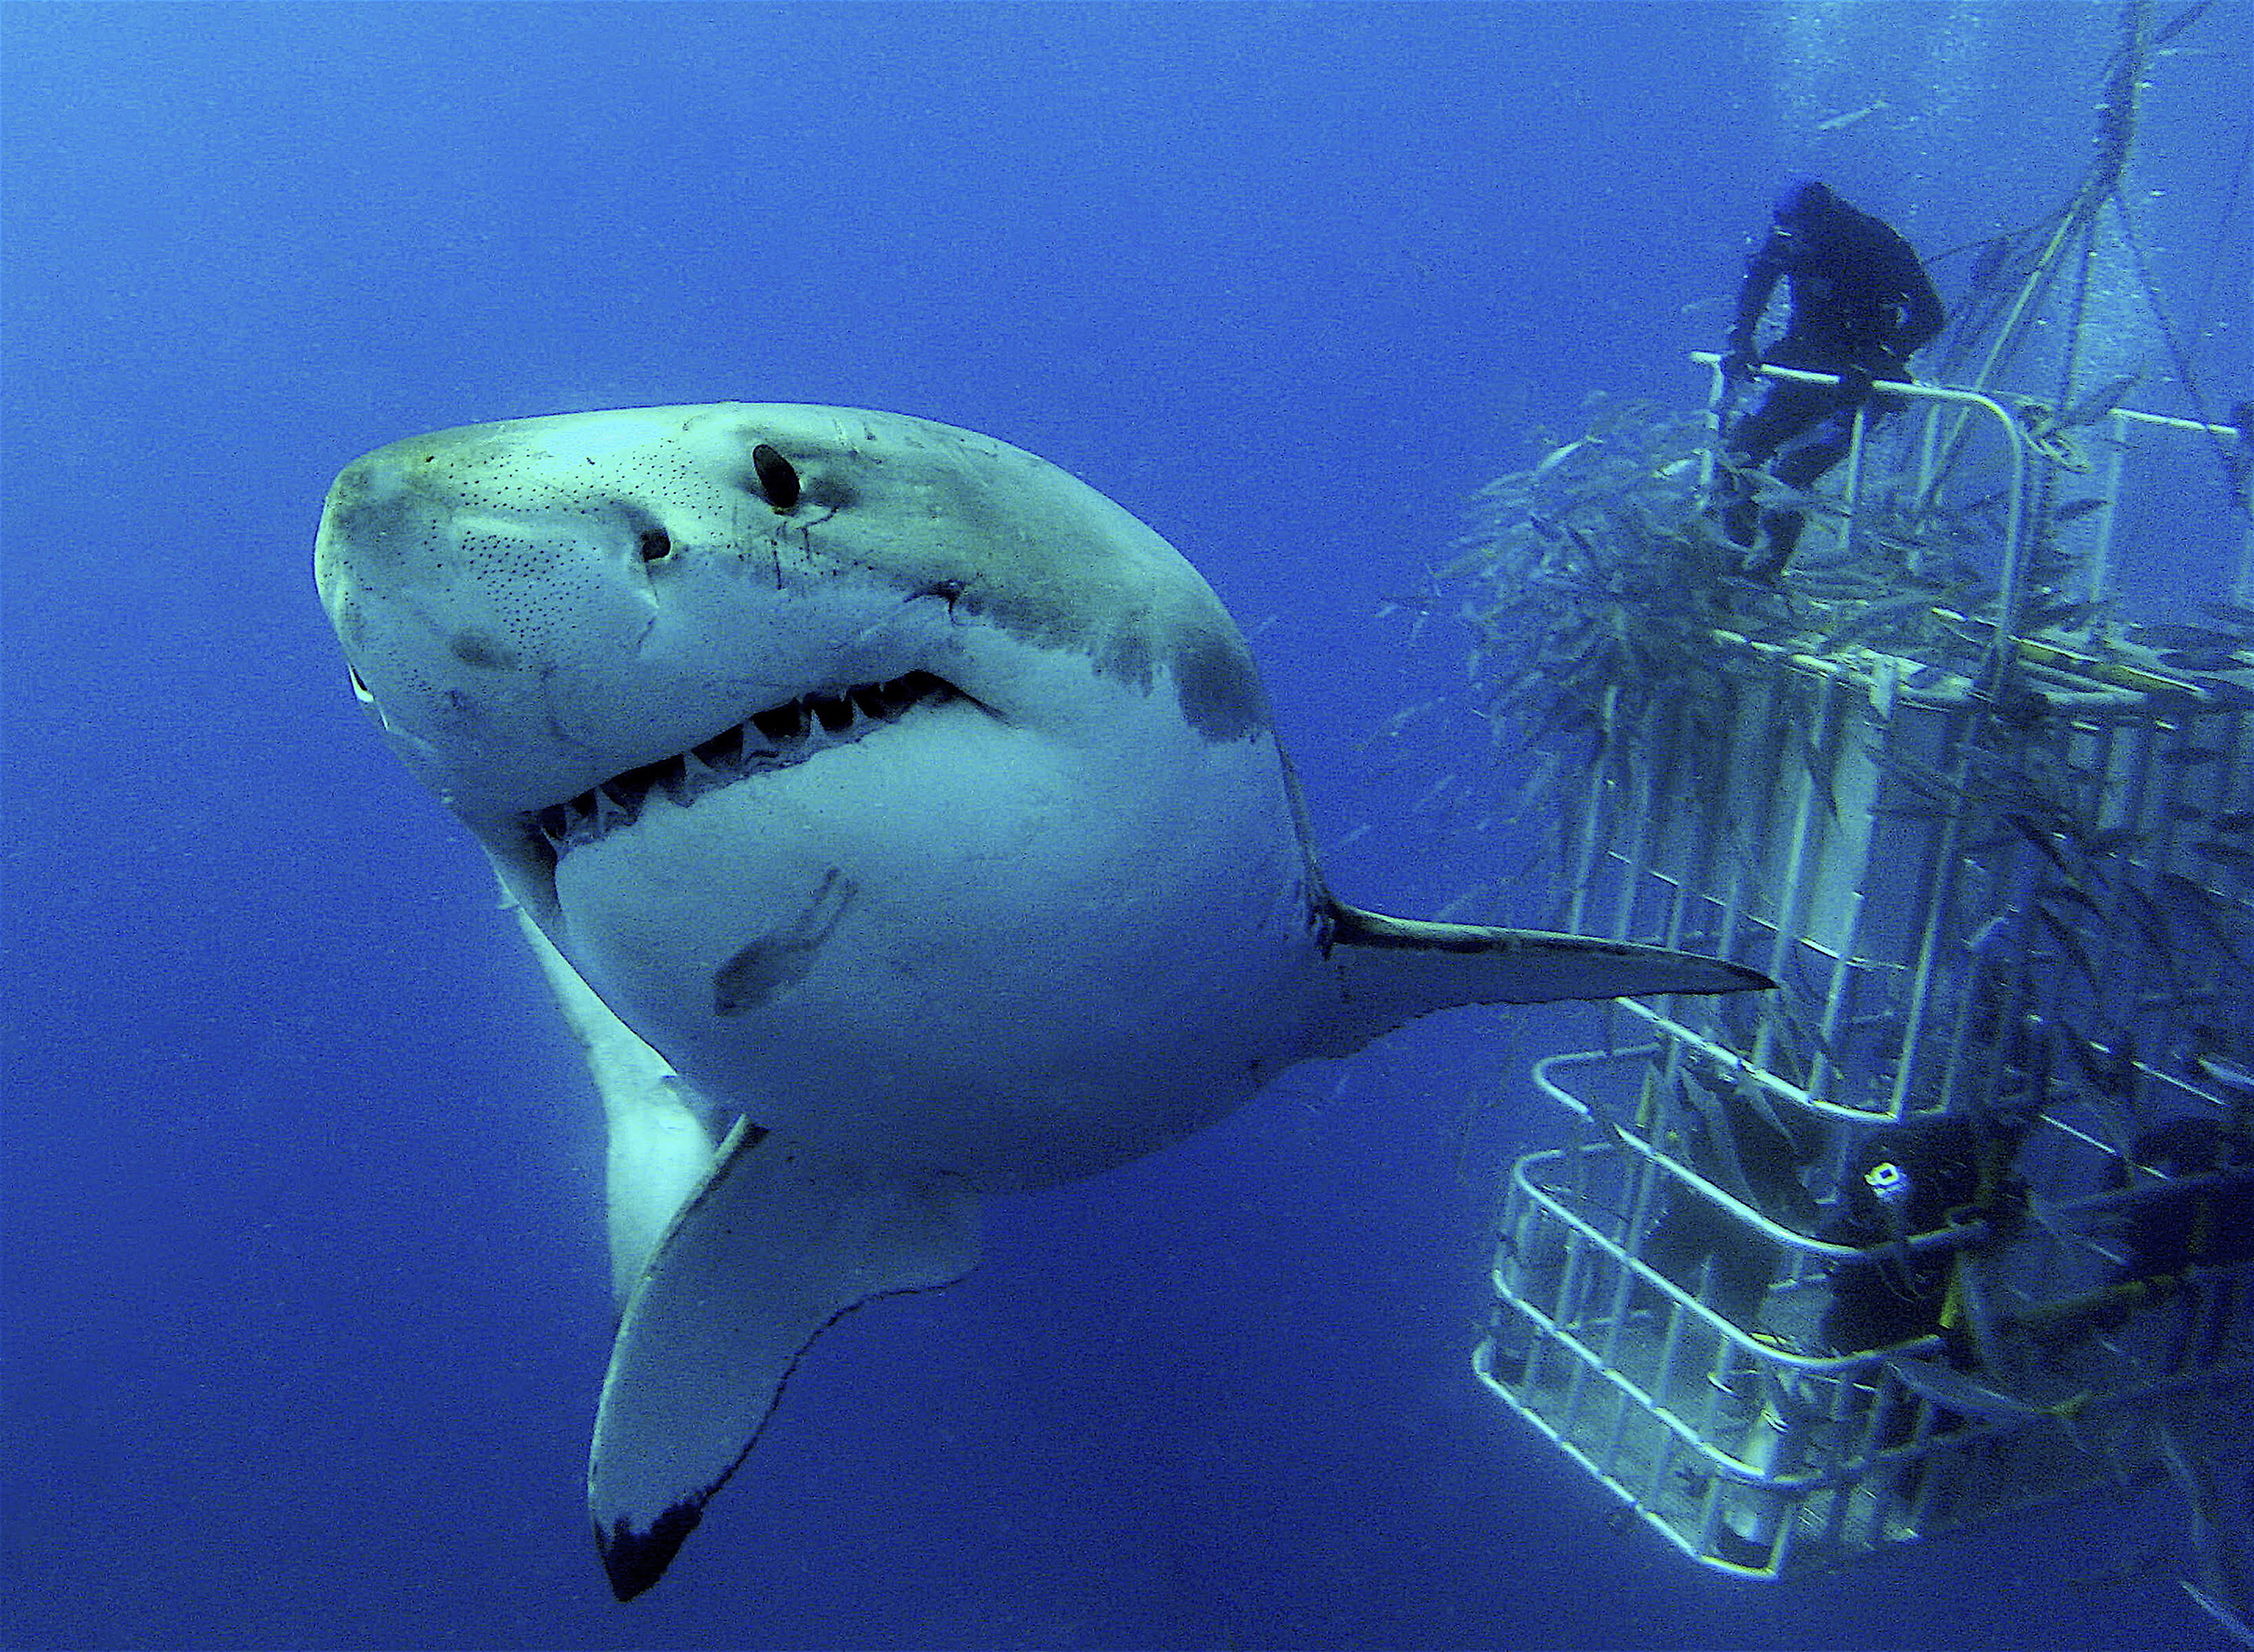 Great white shark, Guadalupe Island, Mexico. Photo by Bret Gilliam